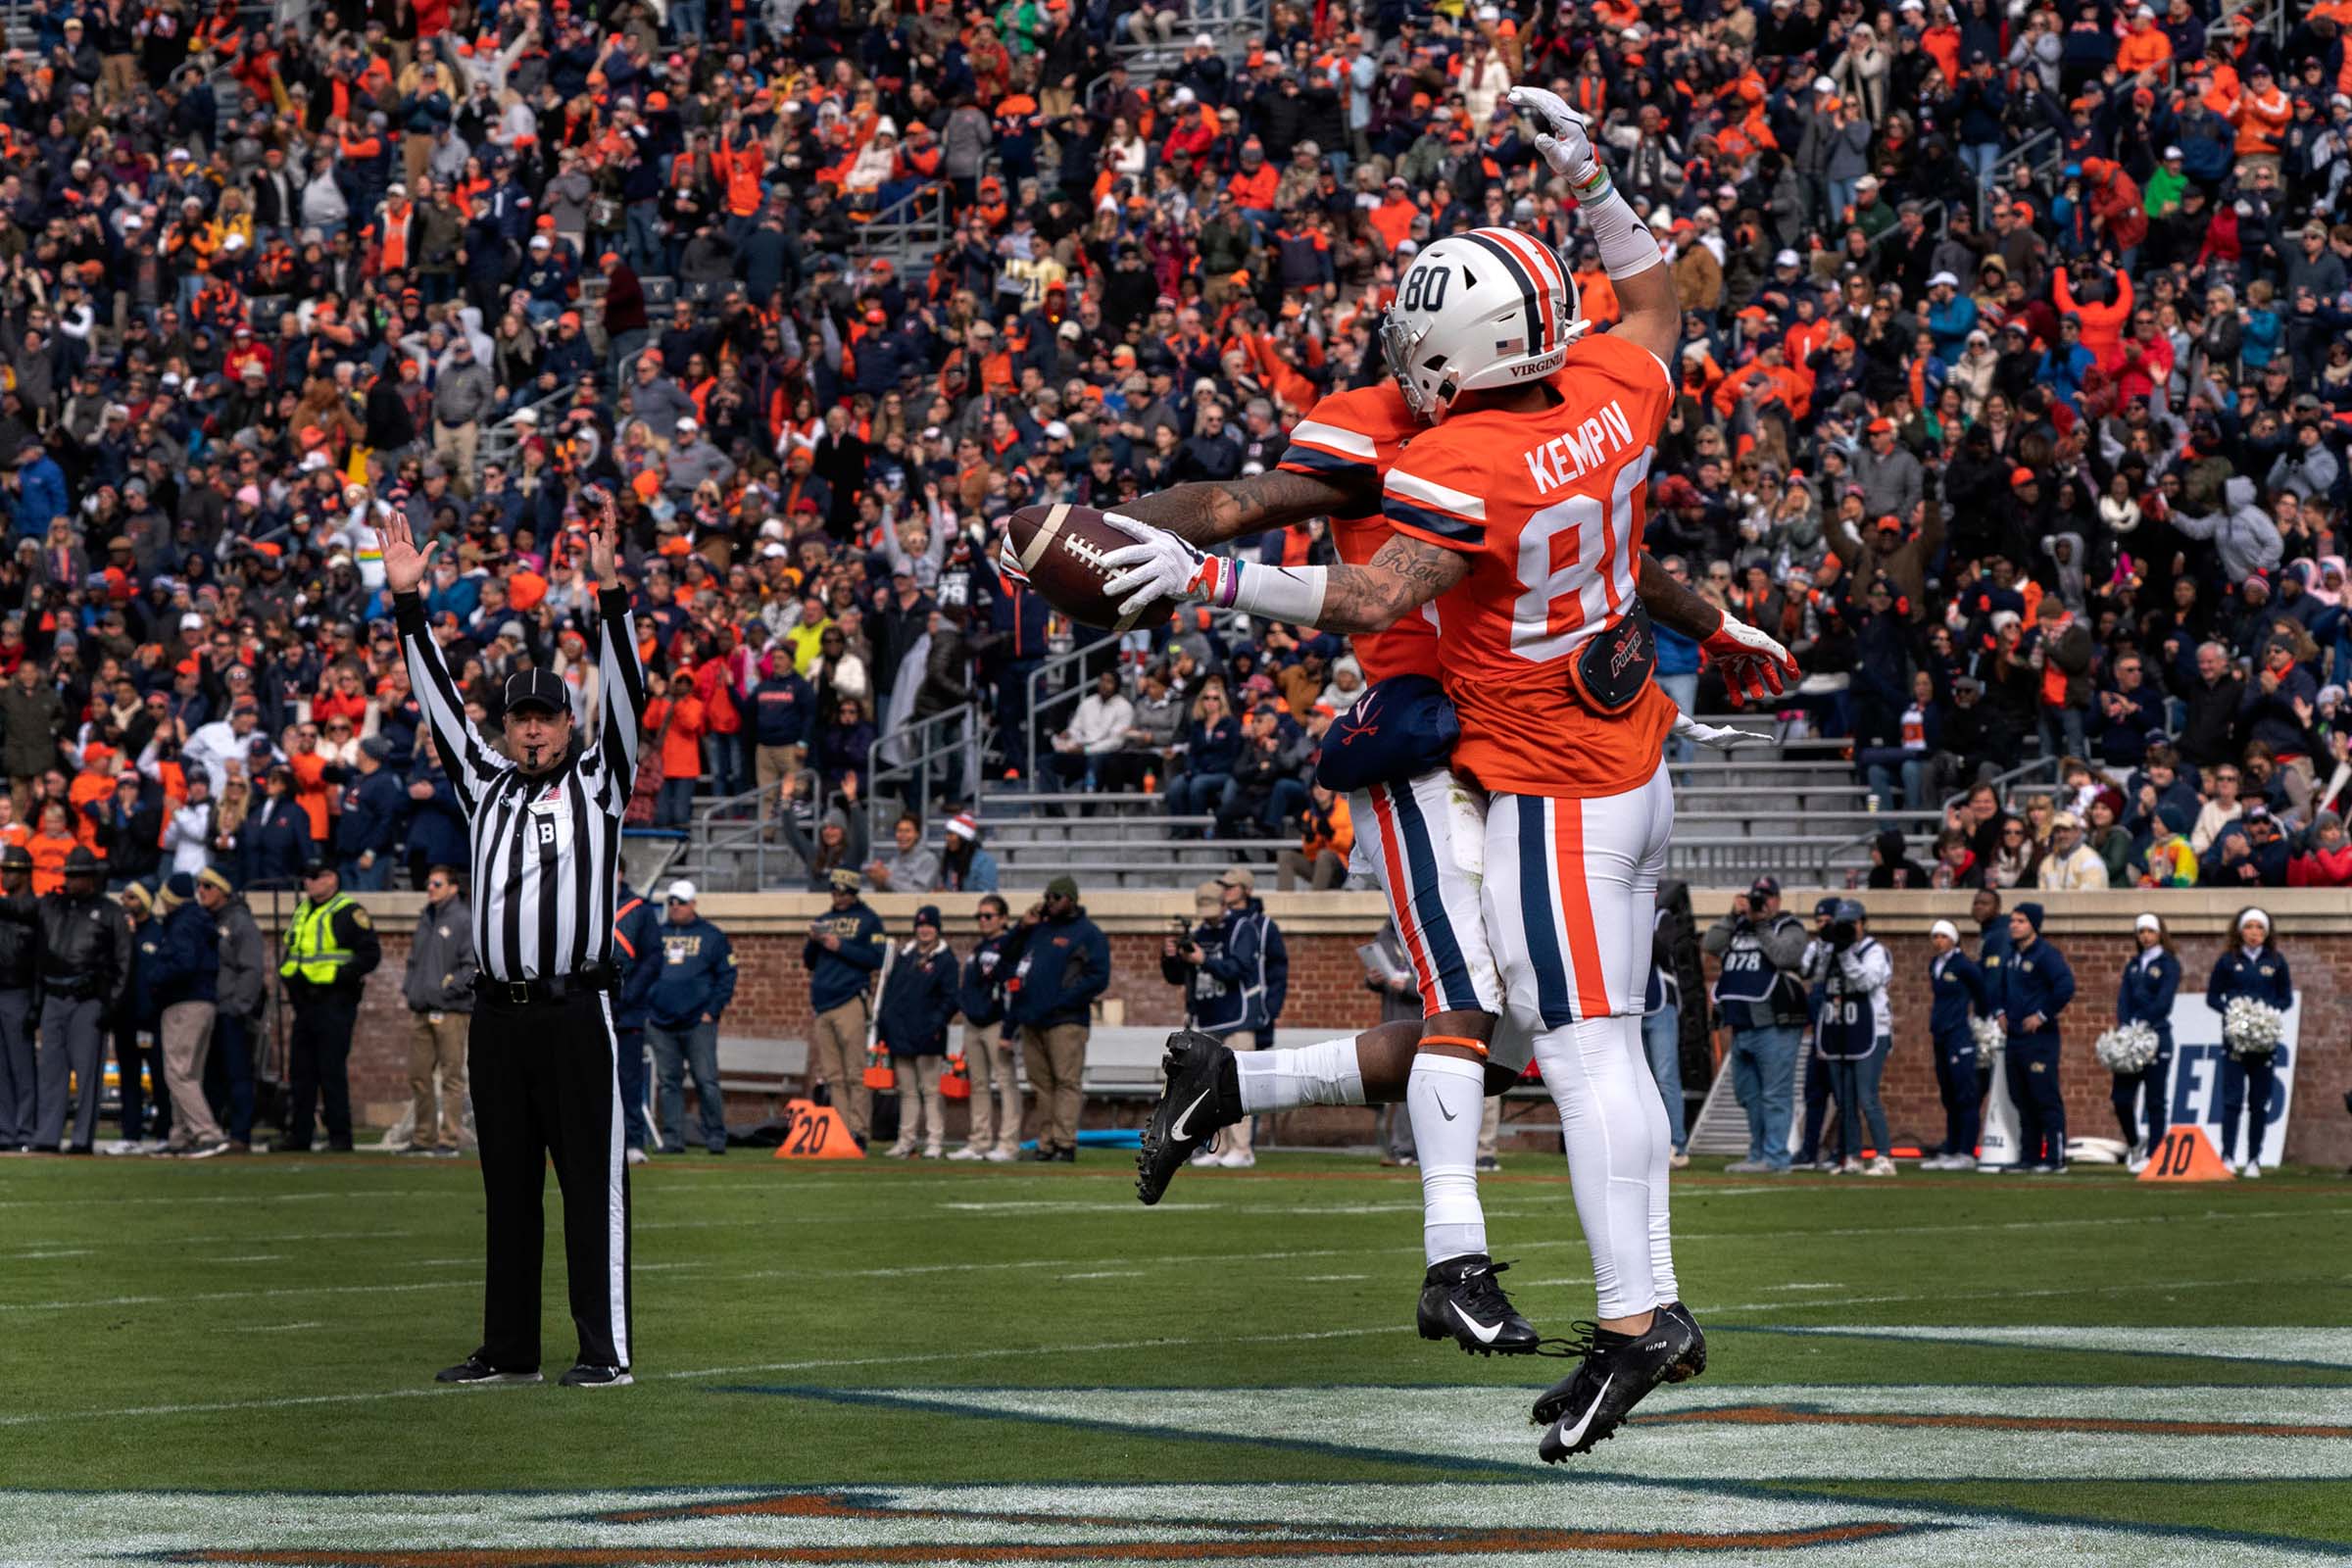 Two UVA players jump in the air and hit each others chest while in the endzone